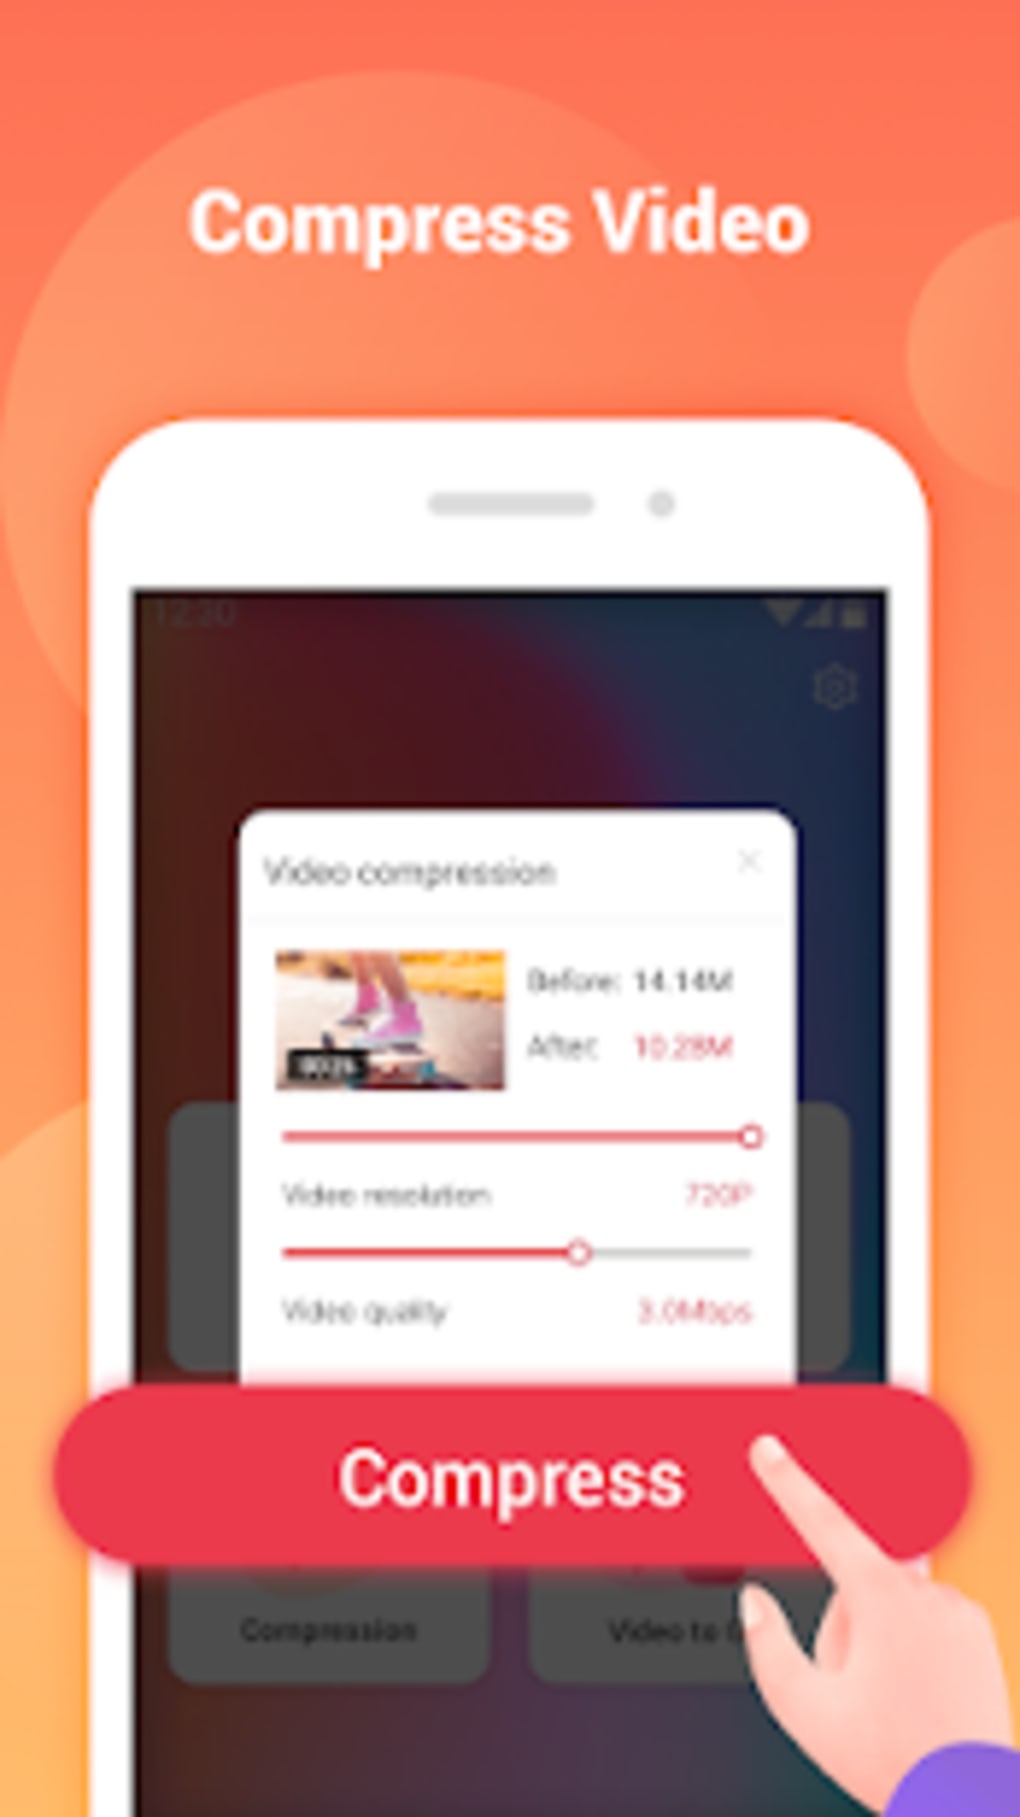 33 Top Pictures Slideshow Maker App - SlideShow Maker - Photo Story with Music App 1.0 Apk ...